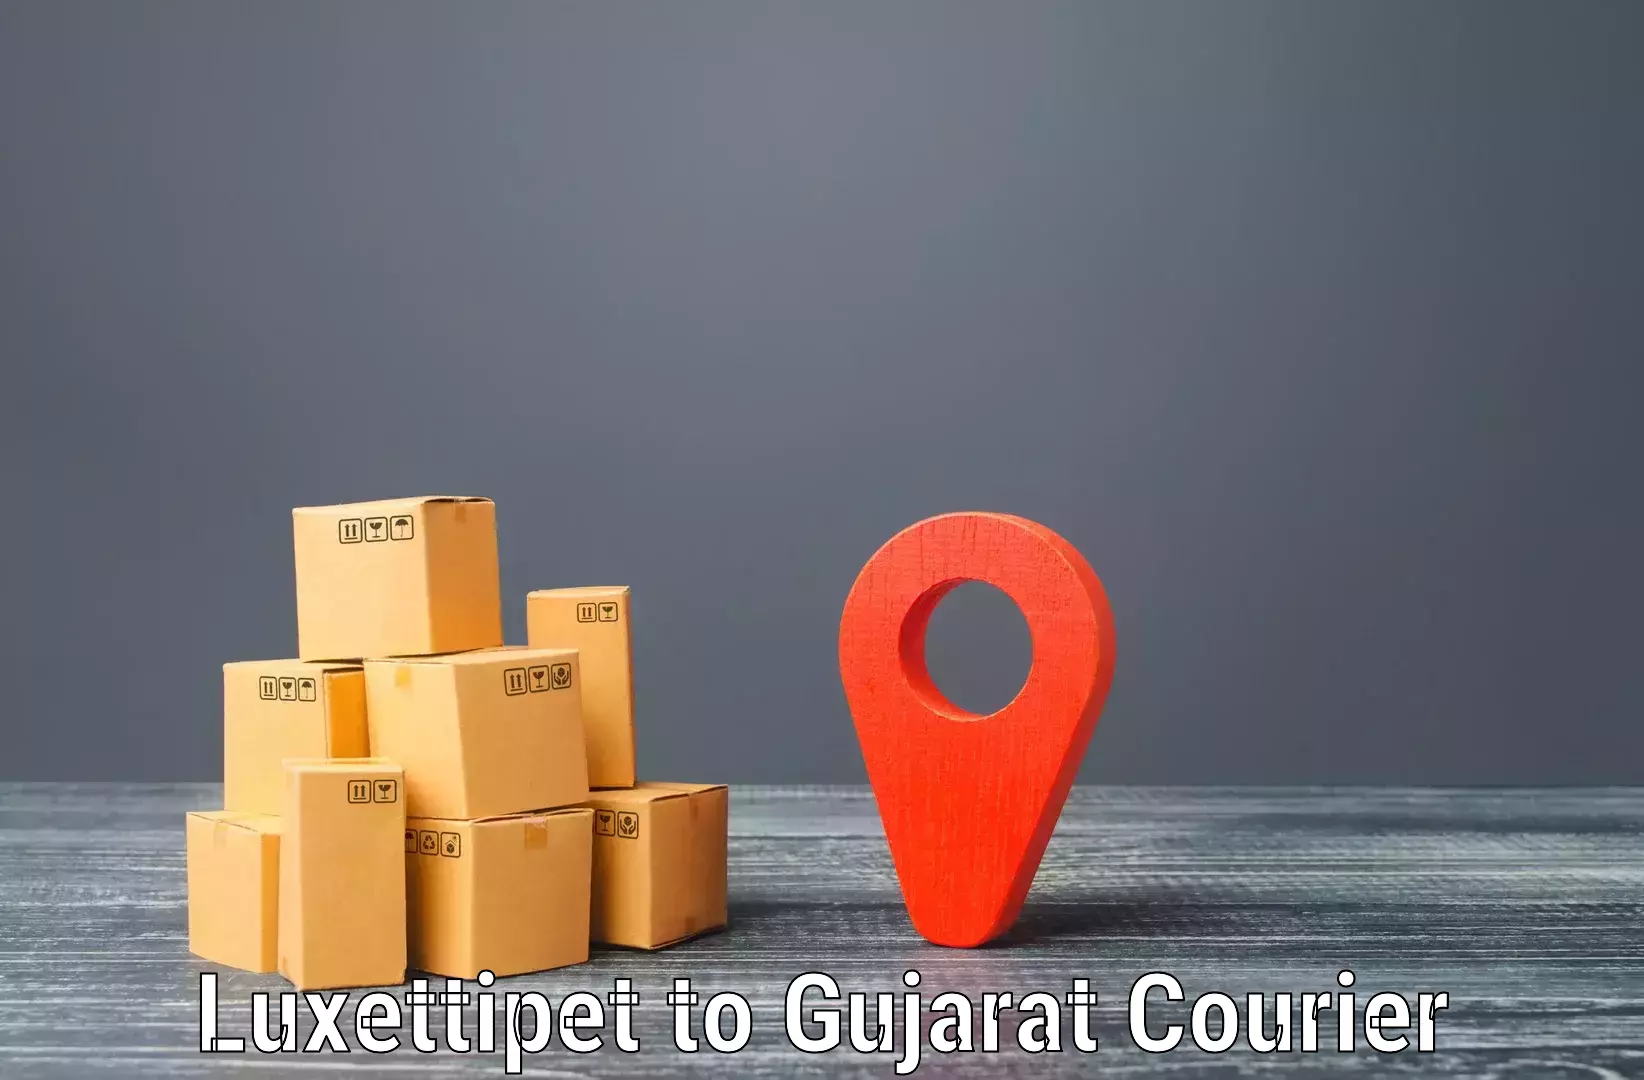 Customer-centric shipping Luxettipet to Gujarat